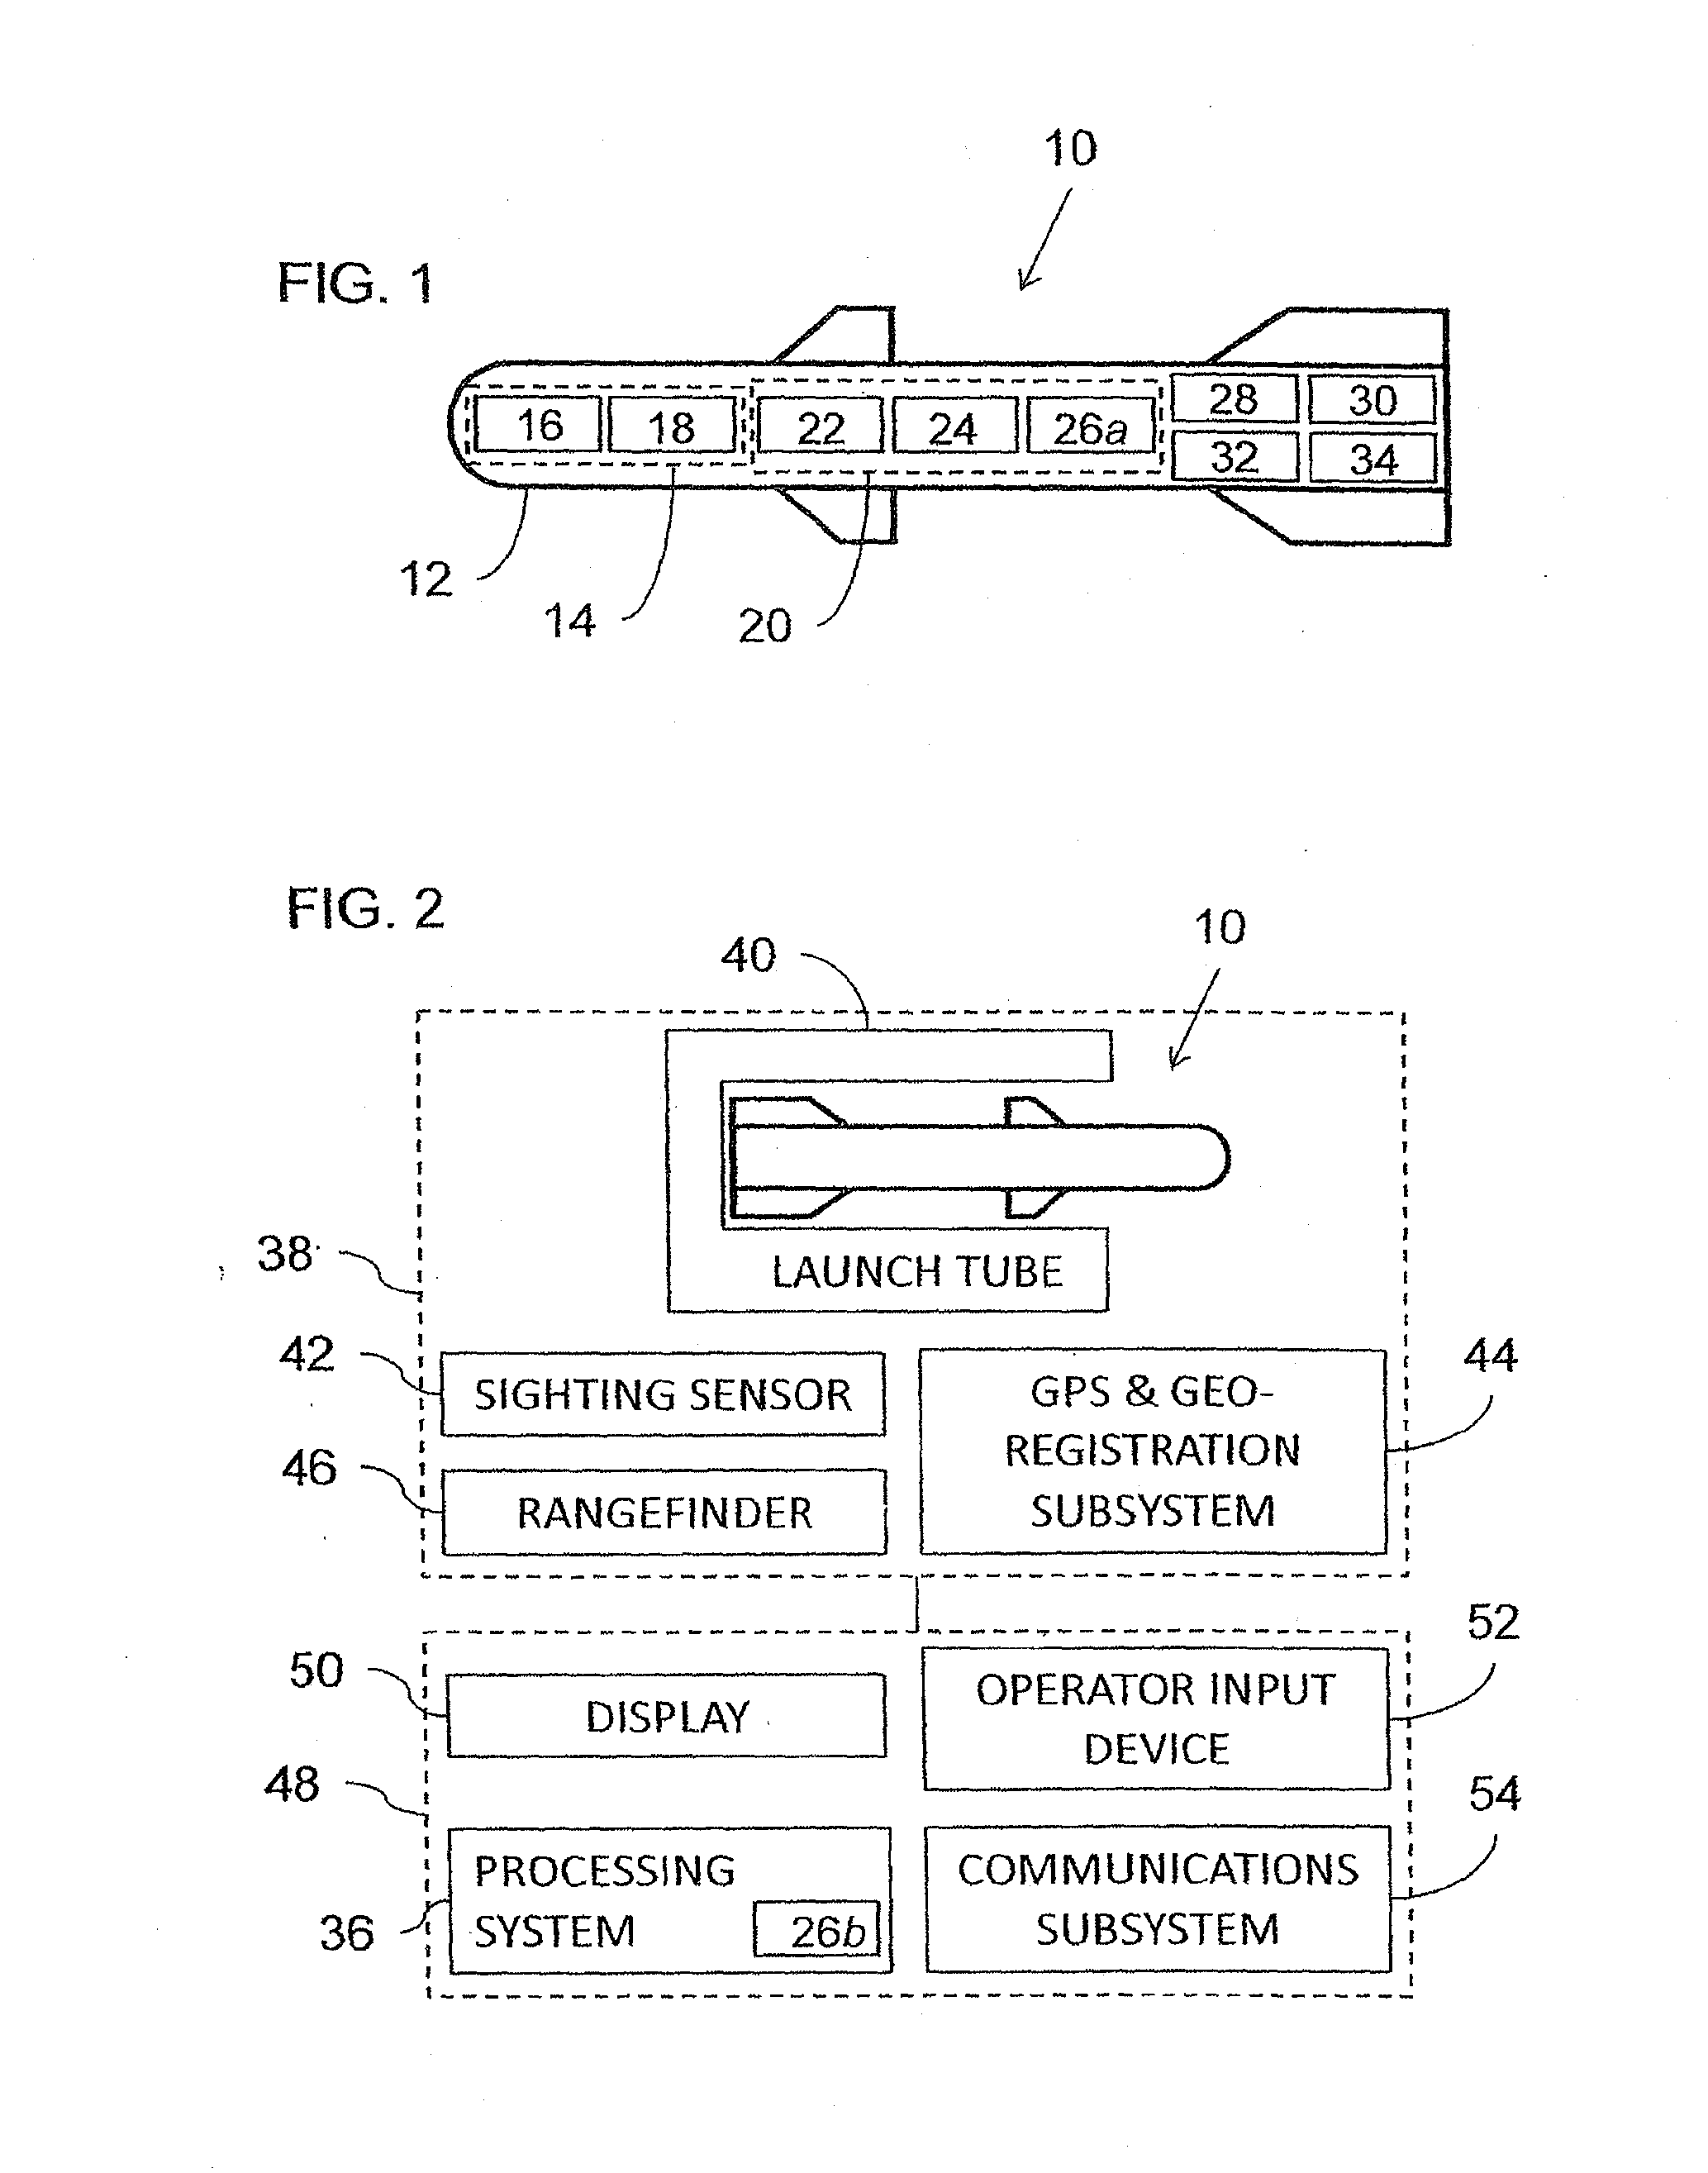 Missile system with navigation capability based on image processing